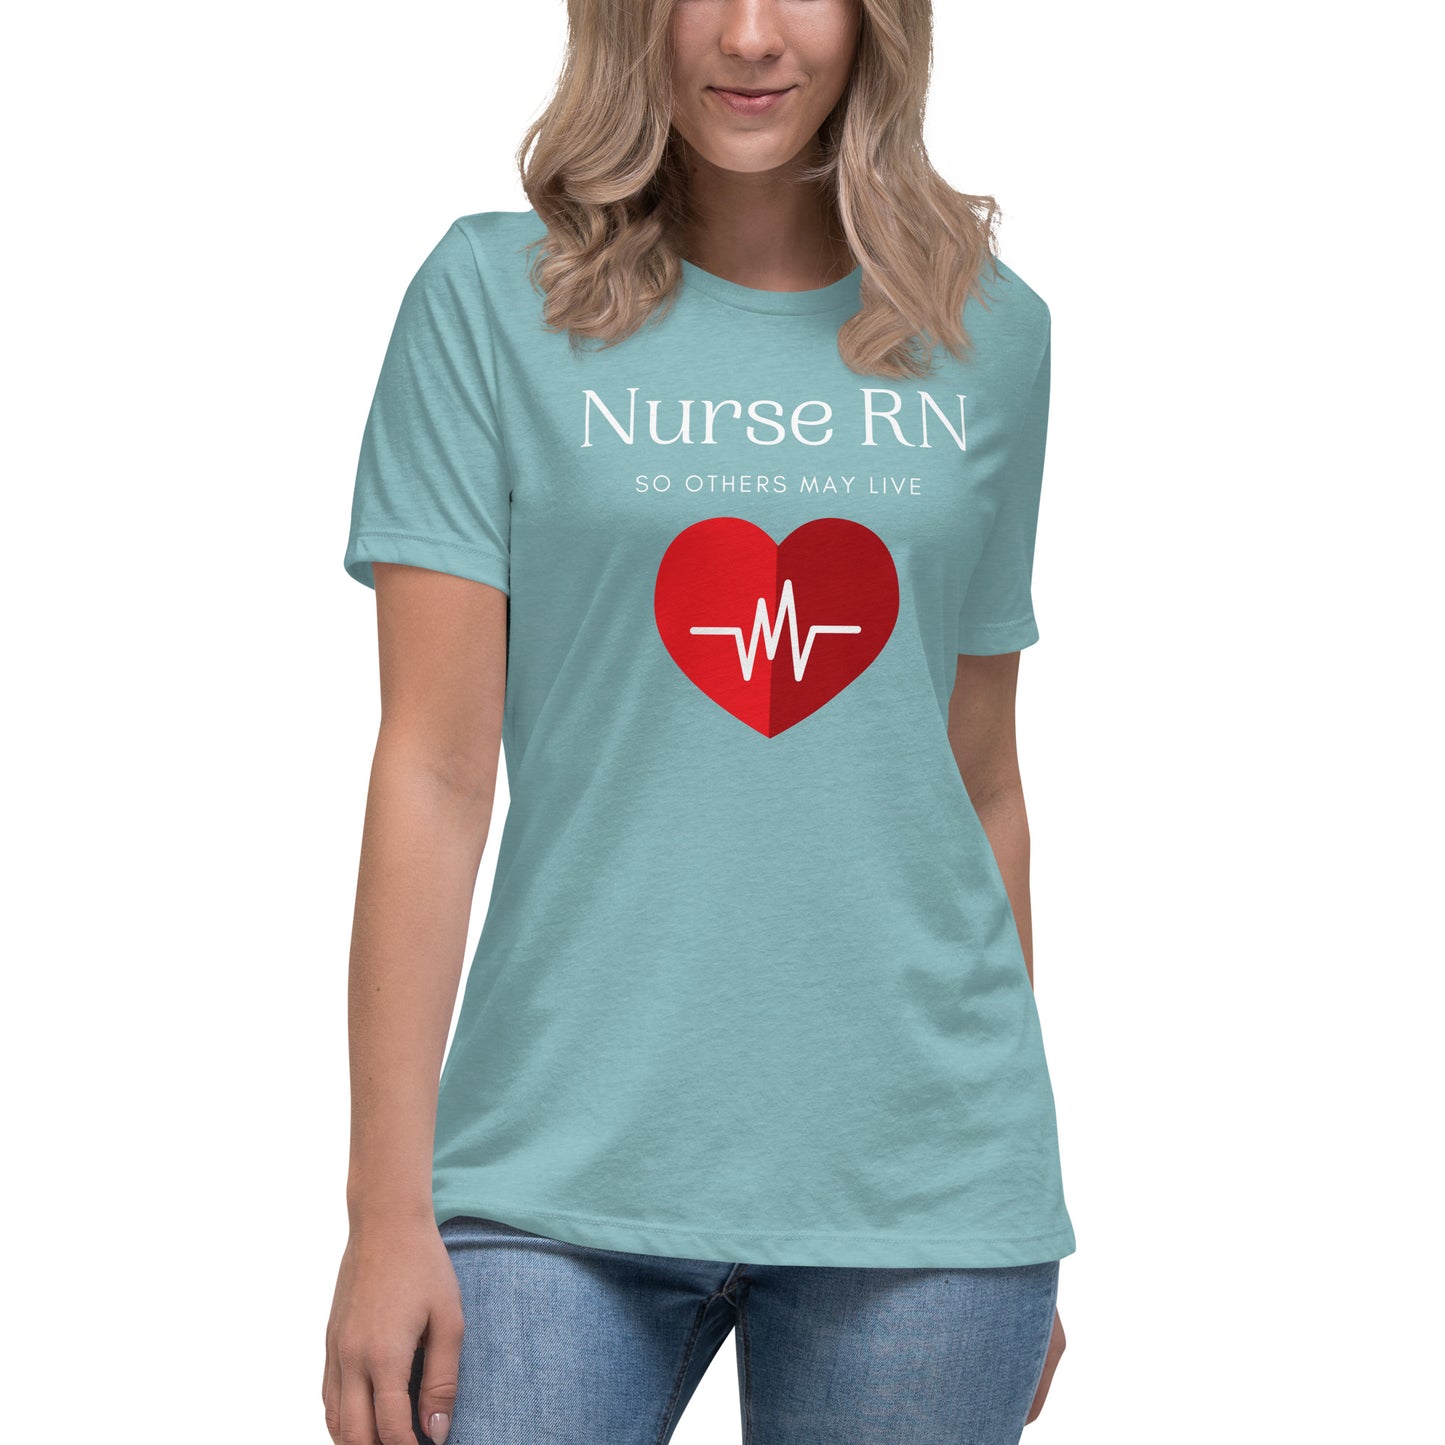 Nurse RN, So Others May Live Women's Relaxed T-Shirt